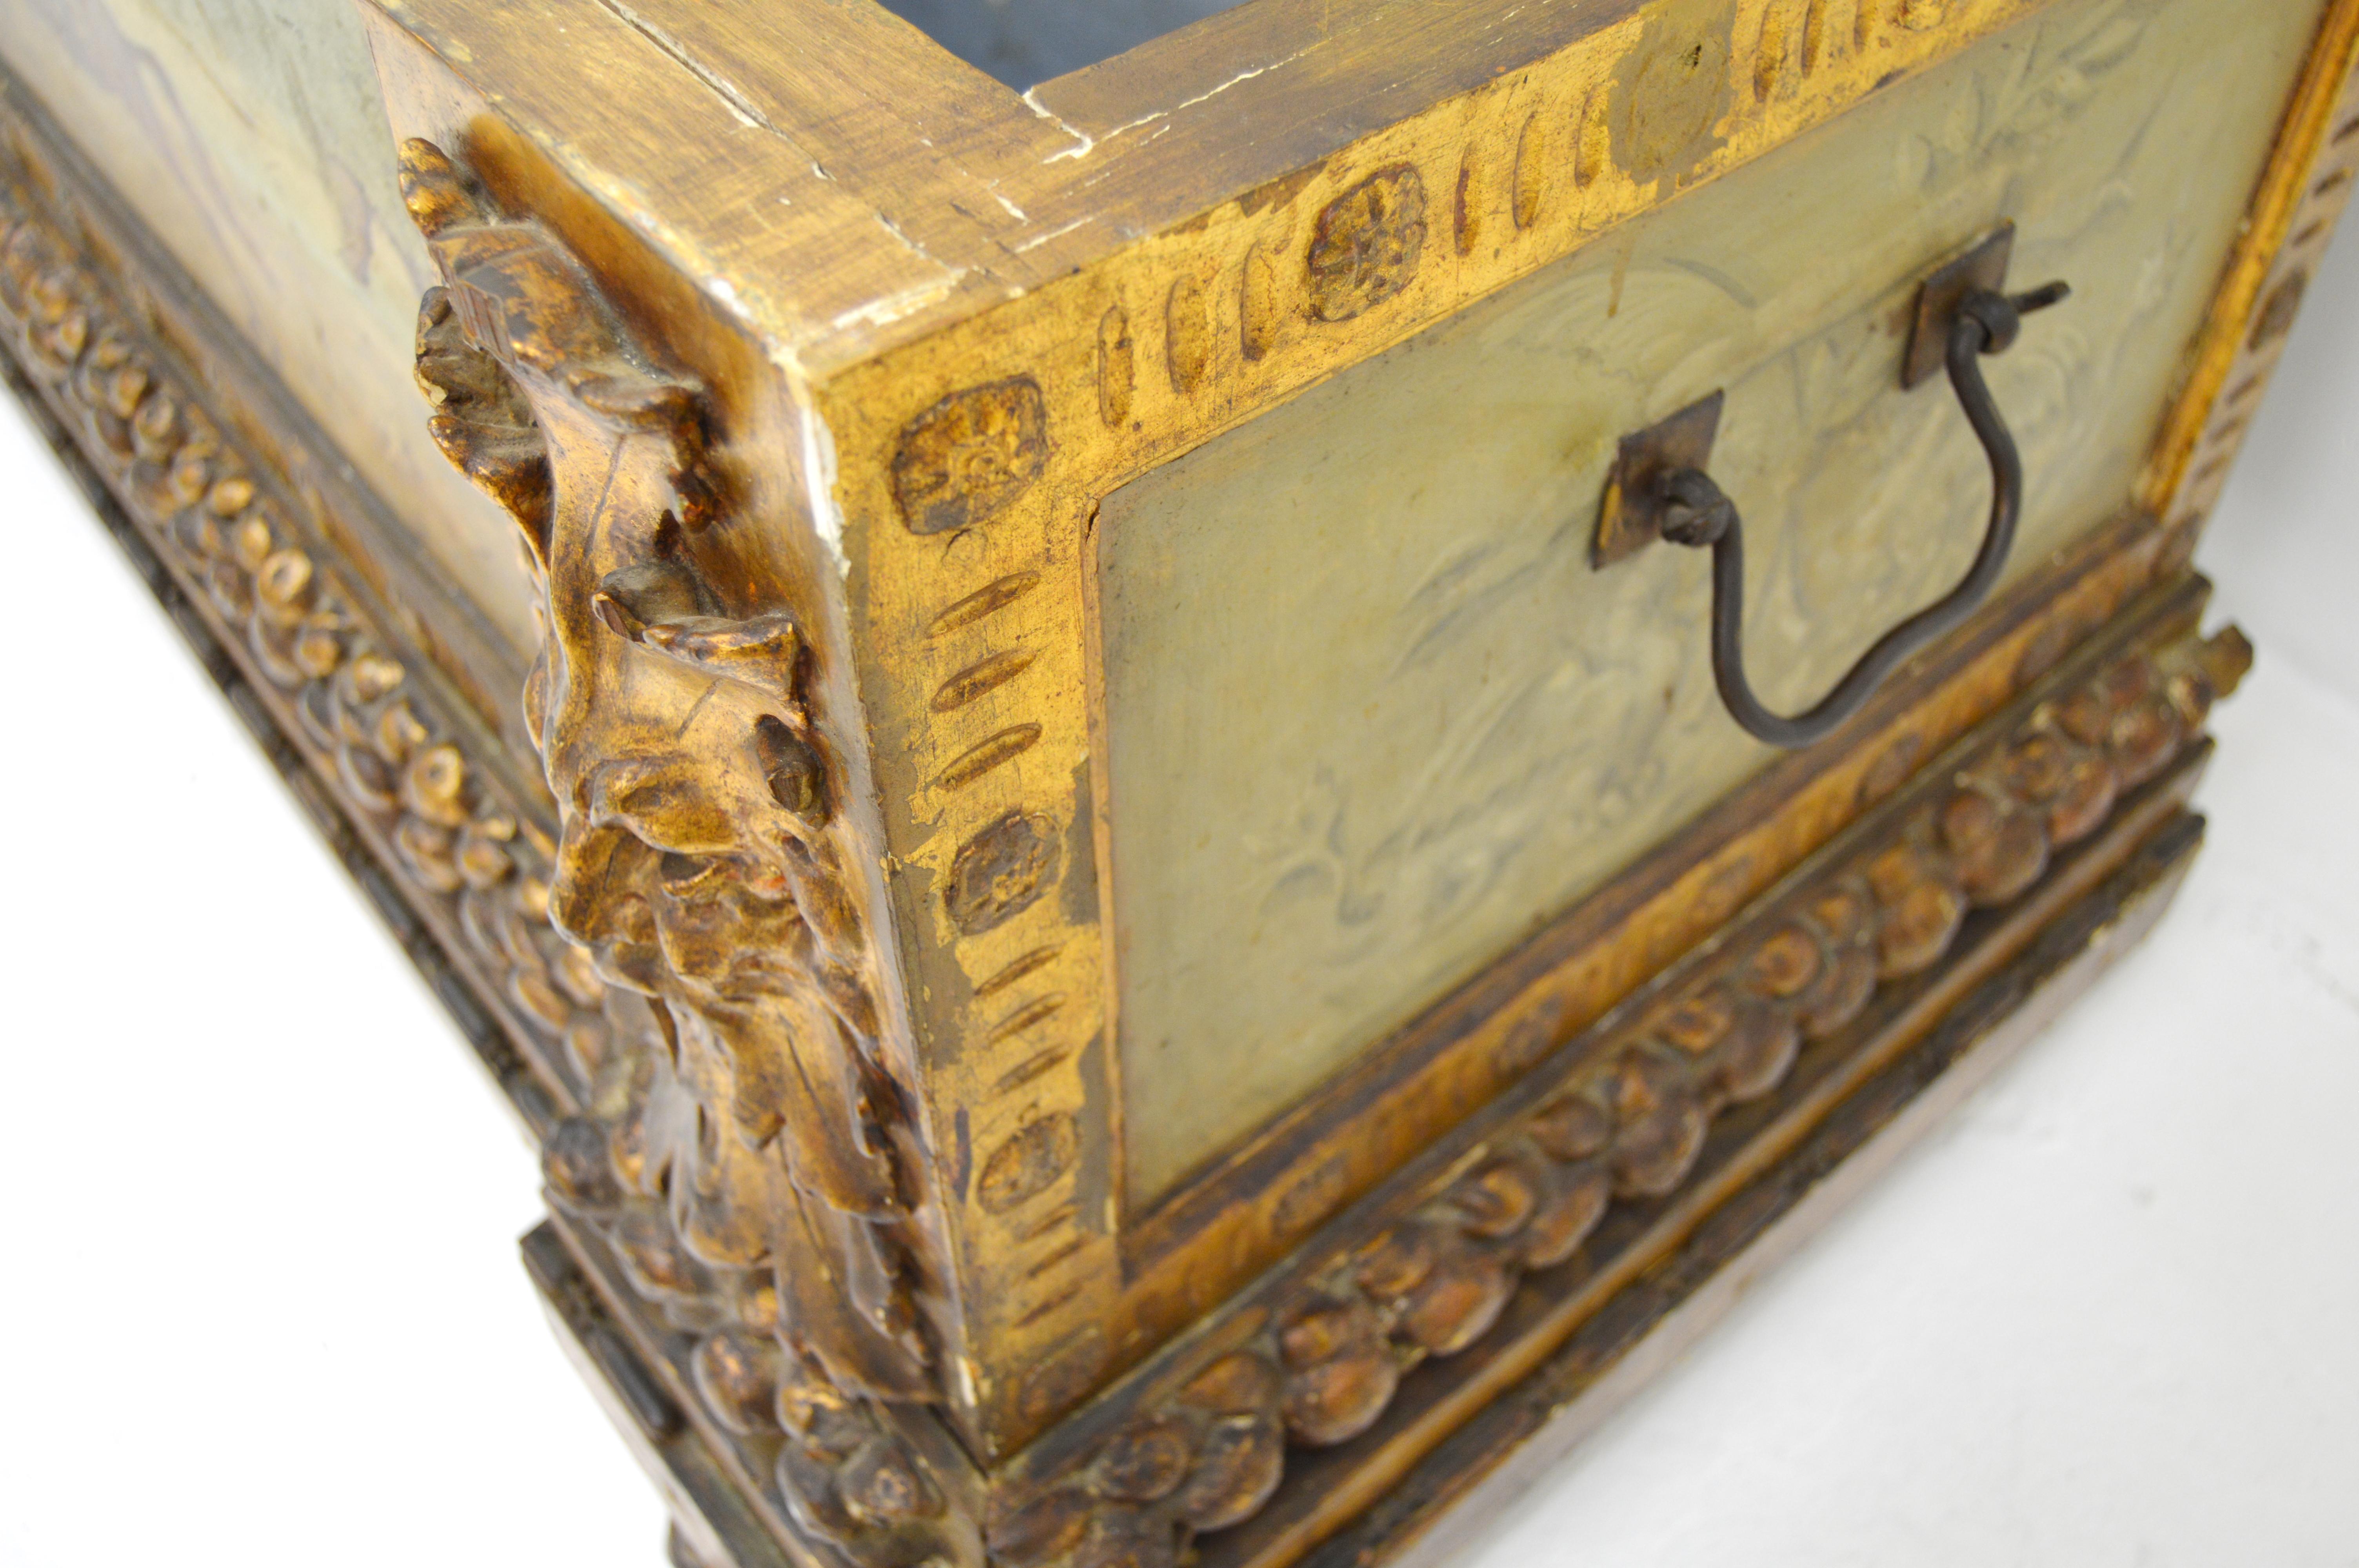 Italian Renaissance Style Carved and painted Florentine Cassone Floor Trunk For Sale 5